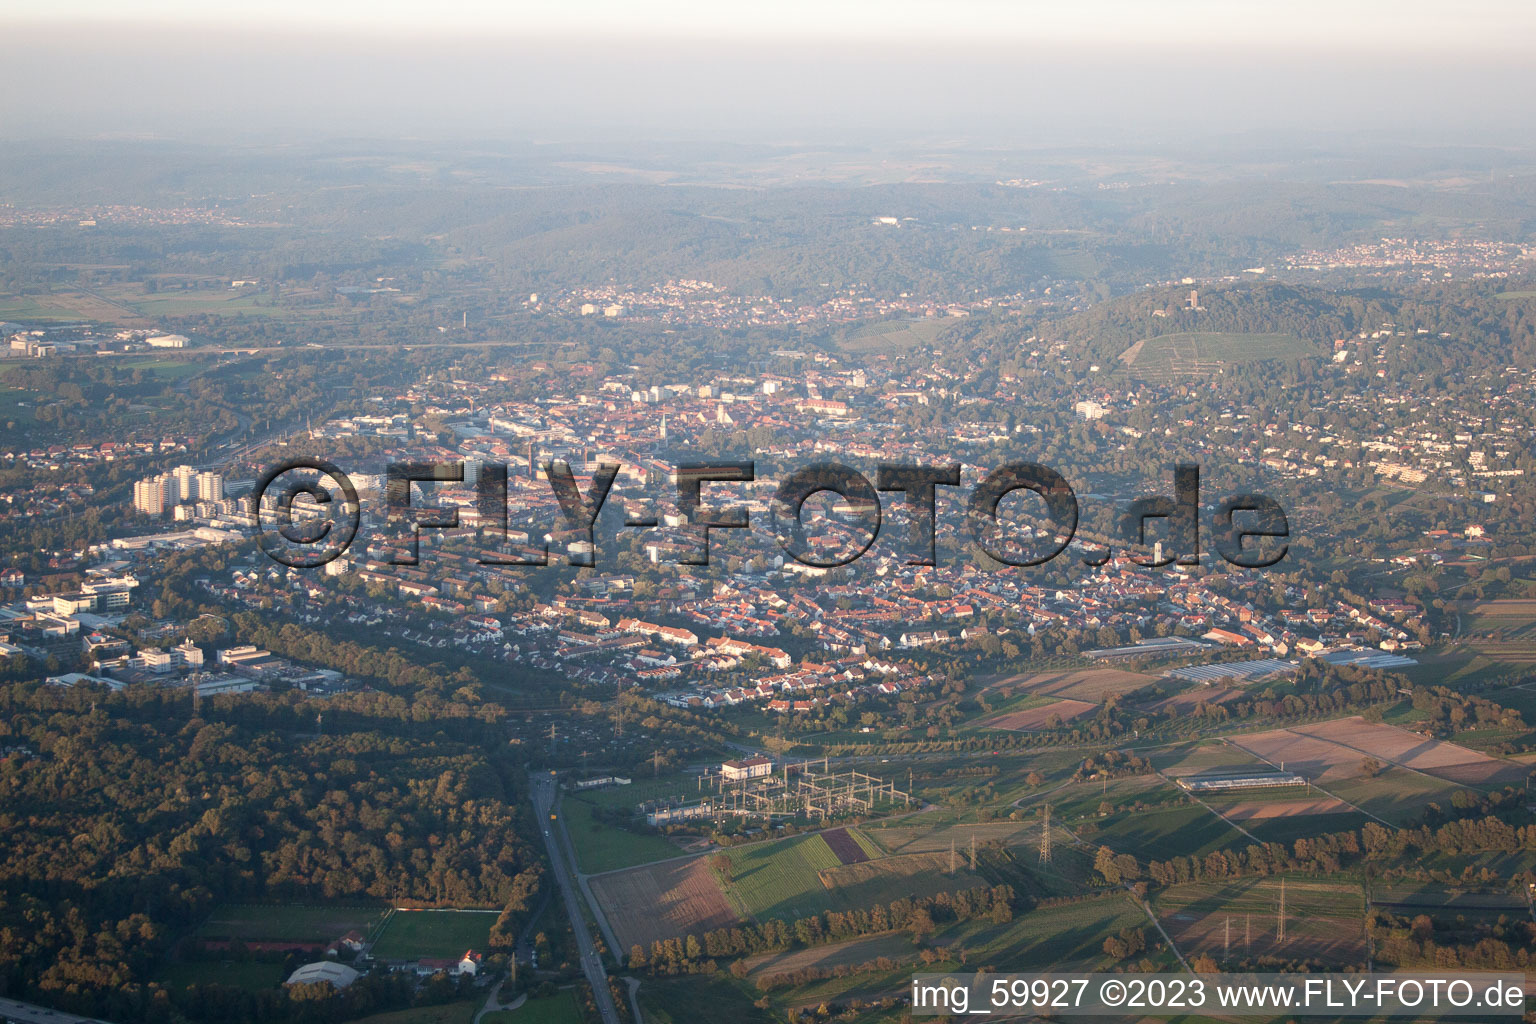 Bird's eye view of Tower Mountain in the district Durlach in Karlsruhe in the state Baden-Wuerttemberg, Germany